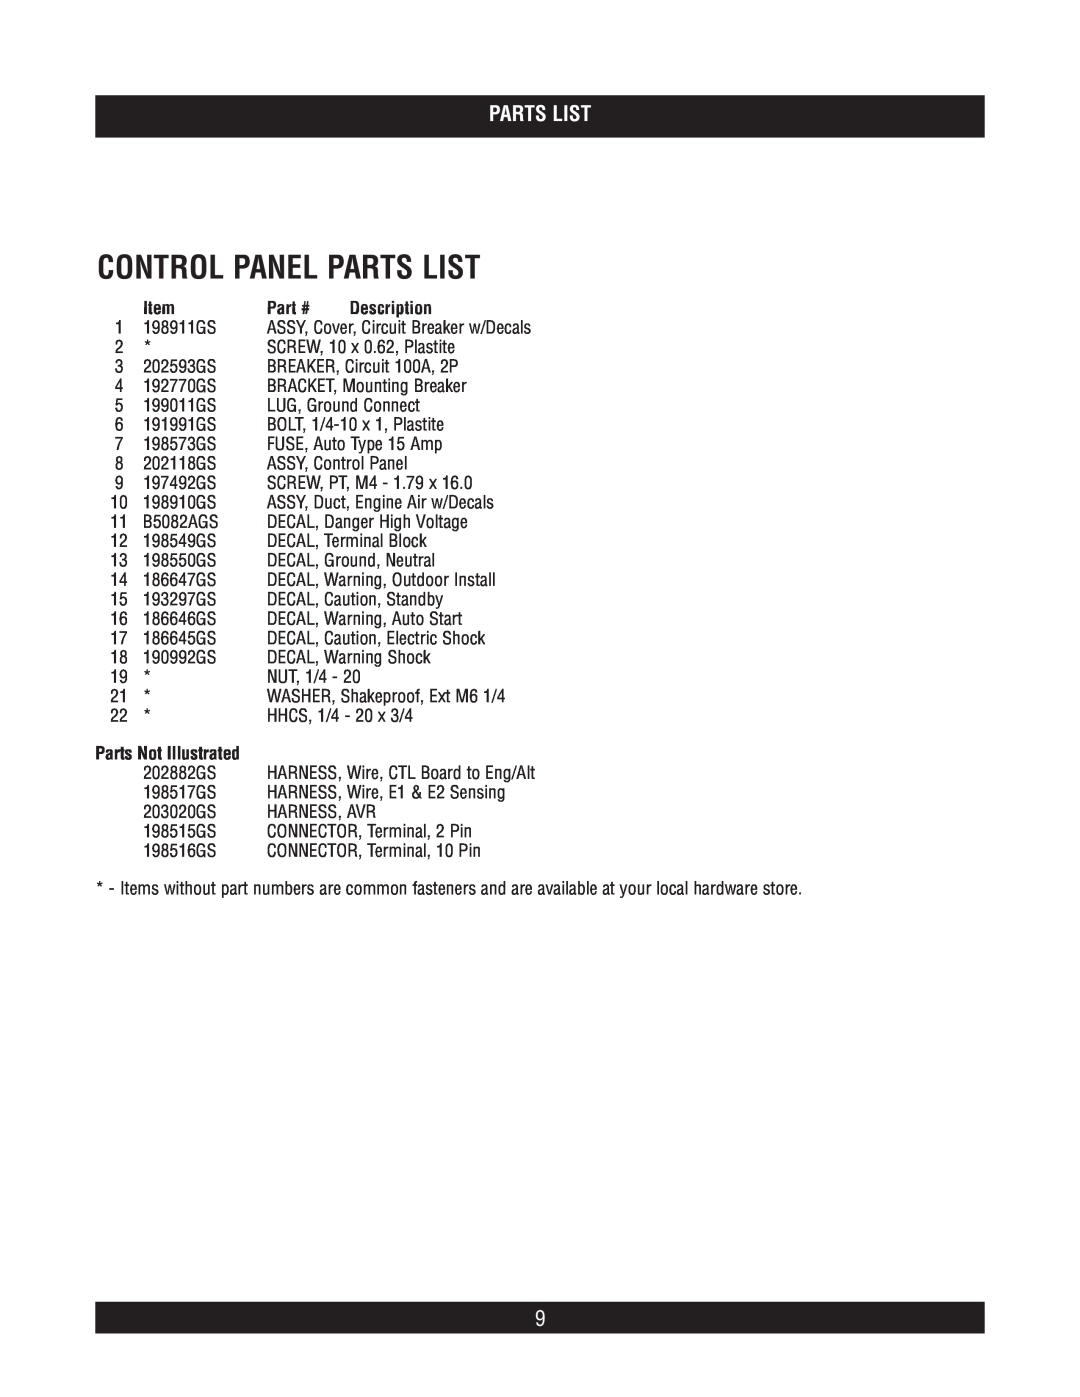 Briggs & Stratton 40266 manual Control Panel Parts List, Parts Not Illustrated 